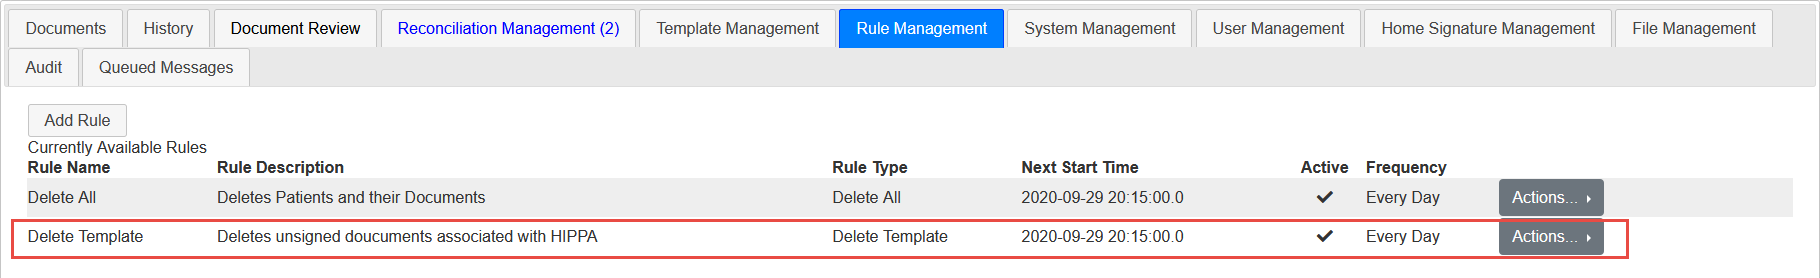 Screenshot of Delete Template Rule Added to List of Rules